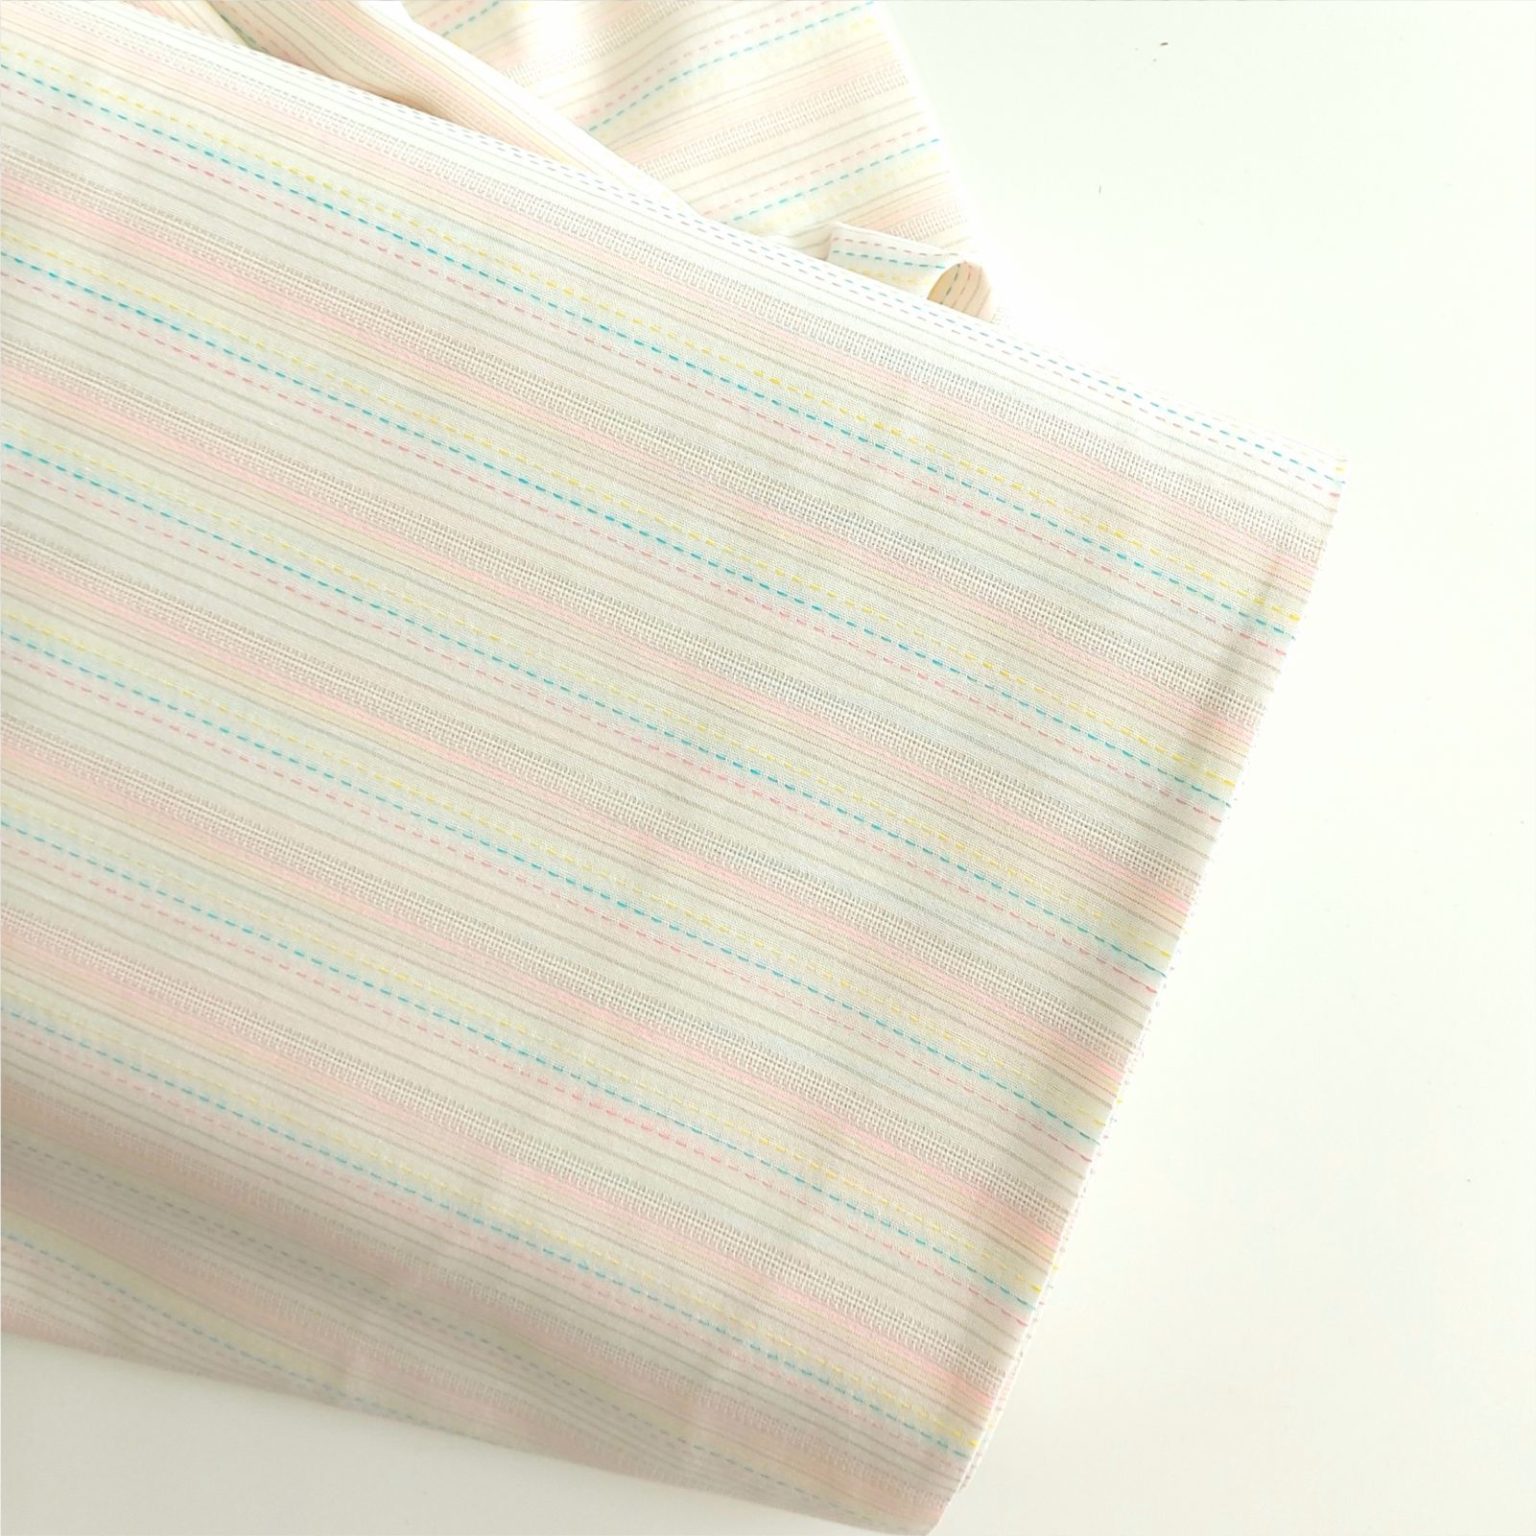 yarn dyed stripe cotton fabric | More Sewing